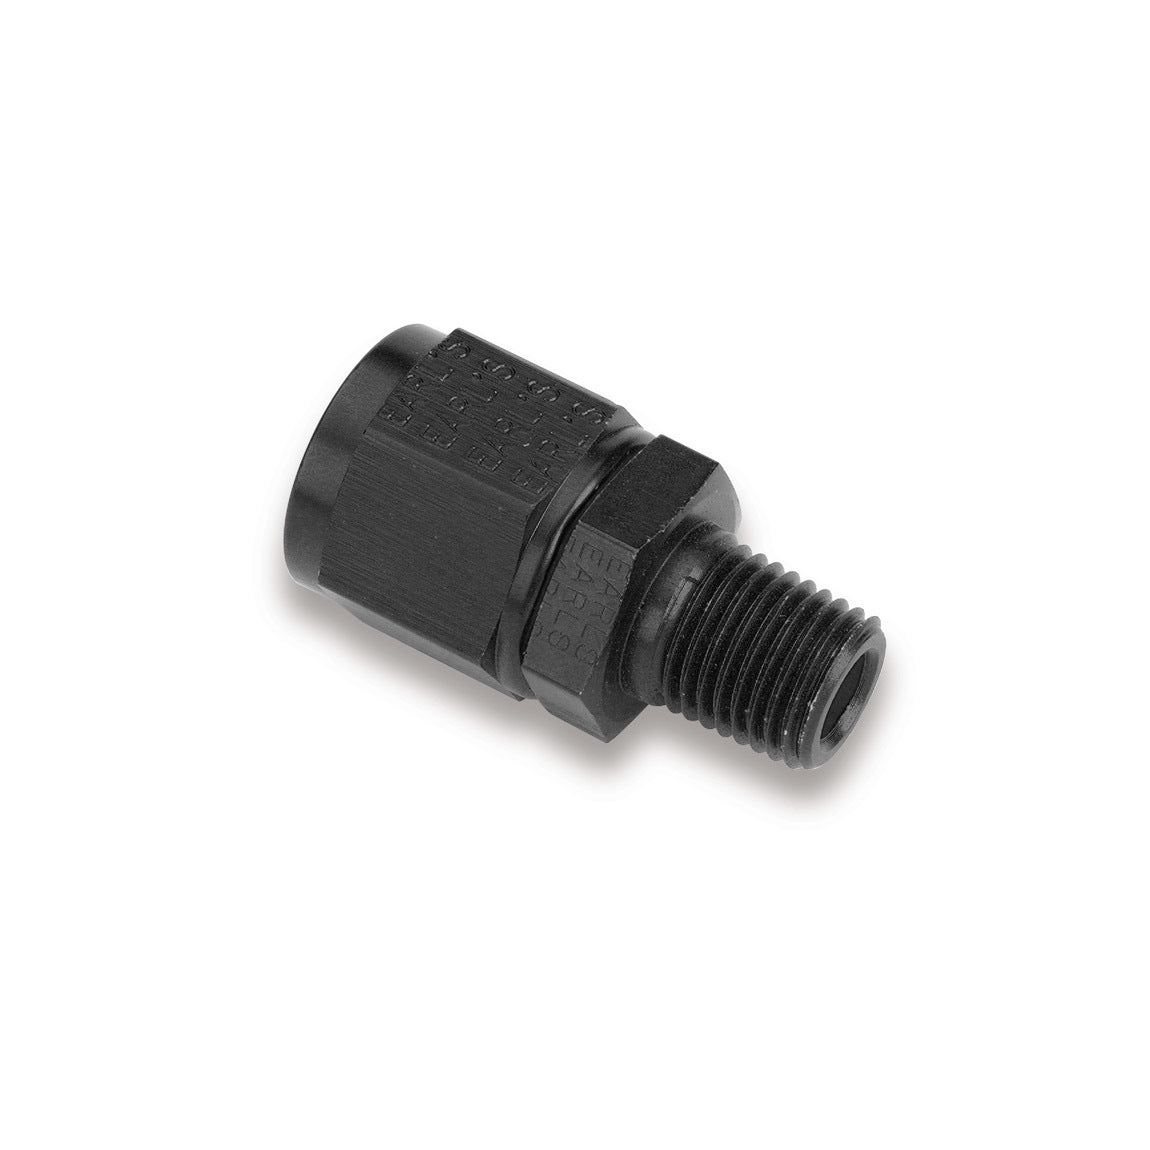 Adapter Fitting 10an Fem Swivel to Male 1/2 NPT